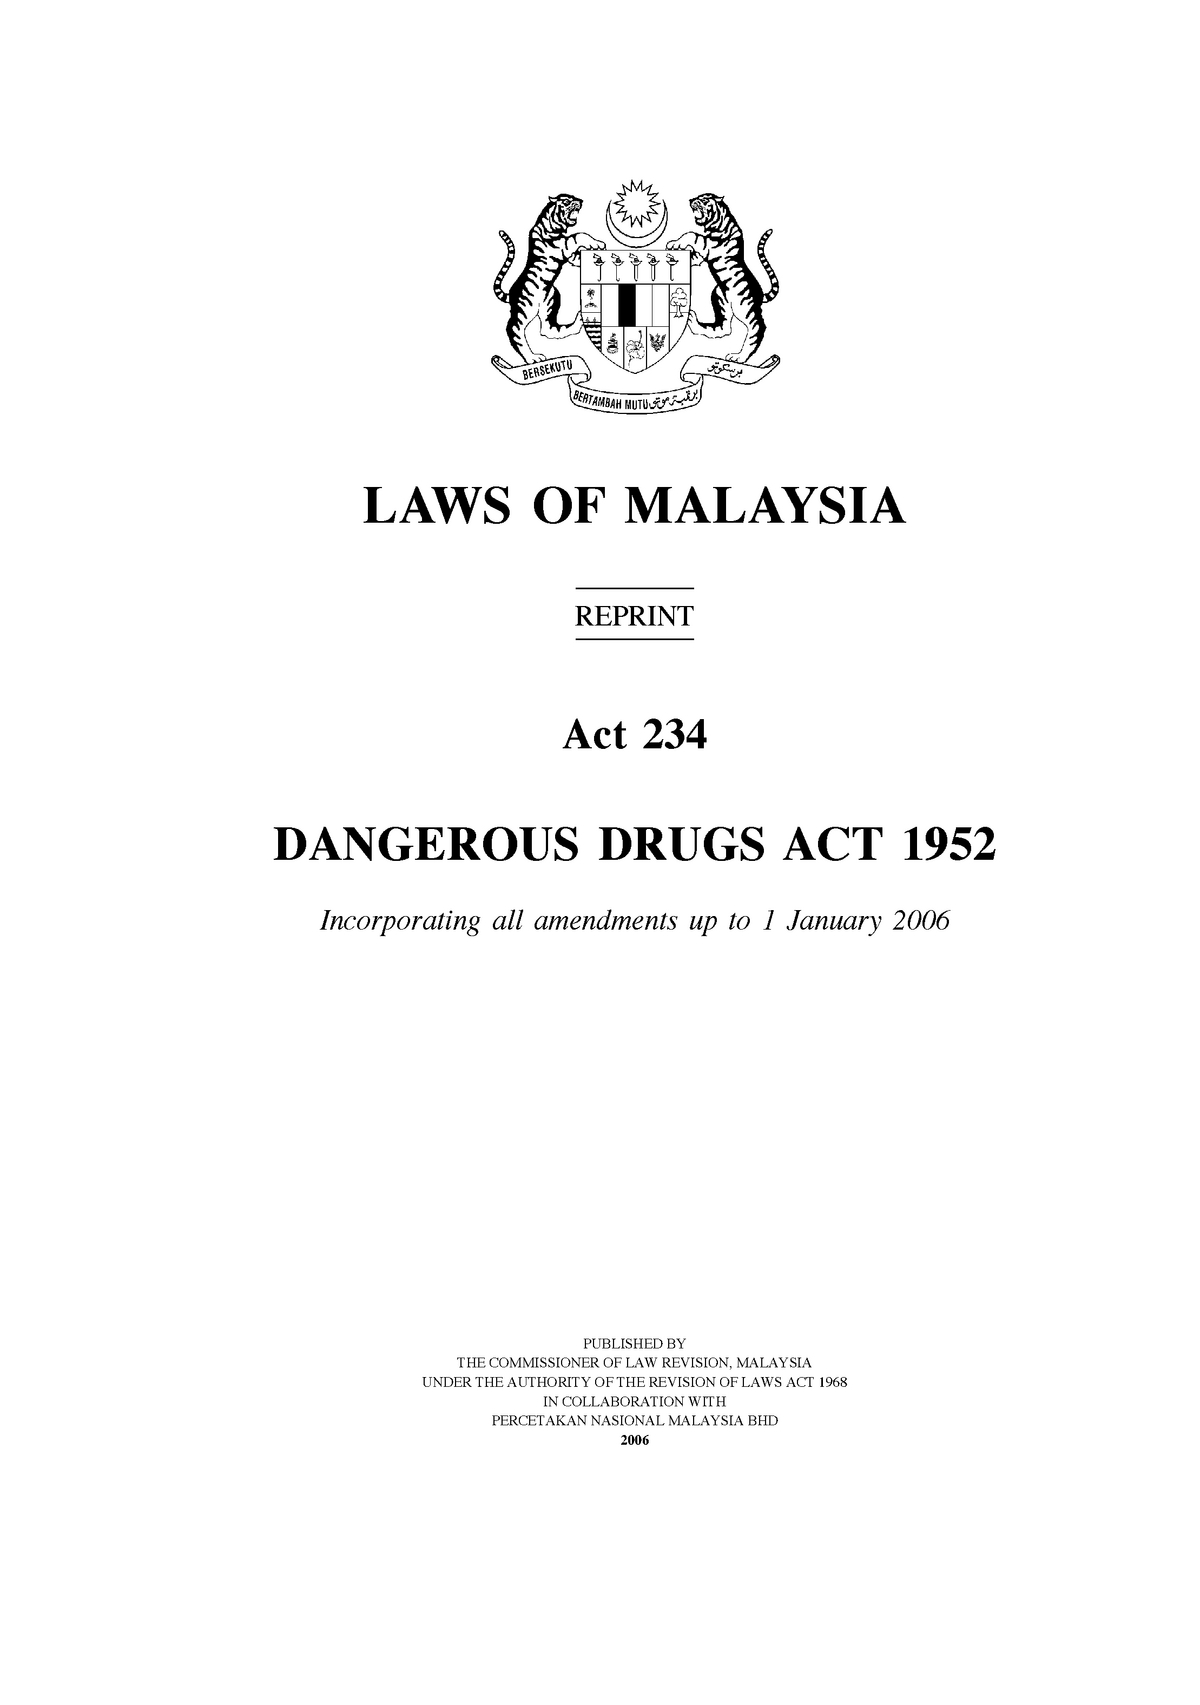 Dangerous Drug Act 1952 [Act 234] - LAWS OF MALAYSIA REPRINT Act 234